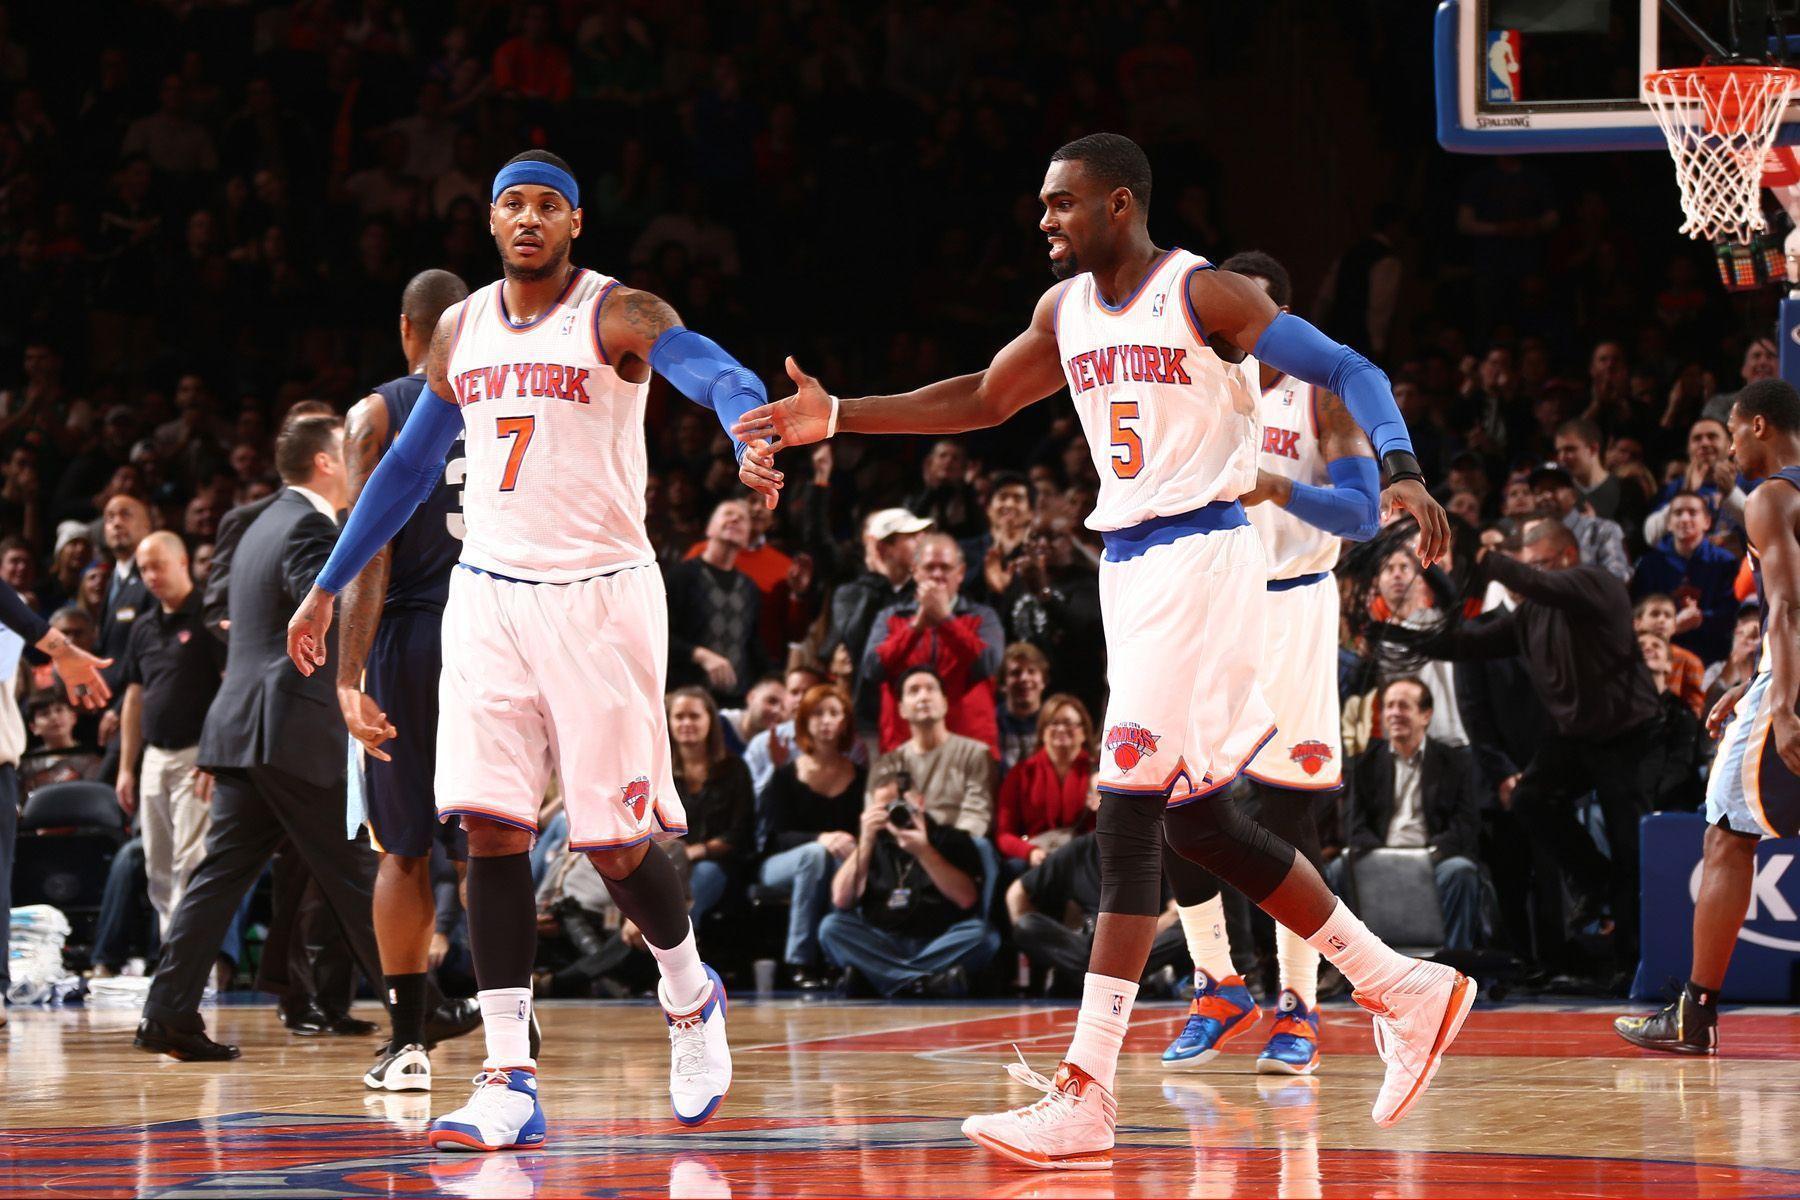 Report: Carmelo Anthony Threatened to Beat up Teammate Tim Hardaway Jr